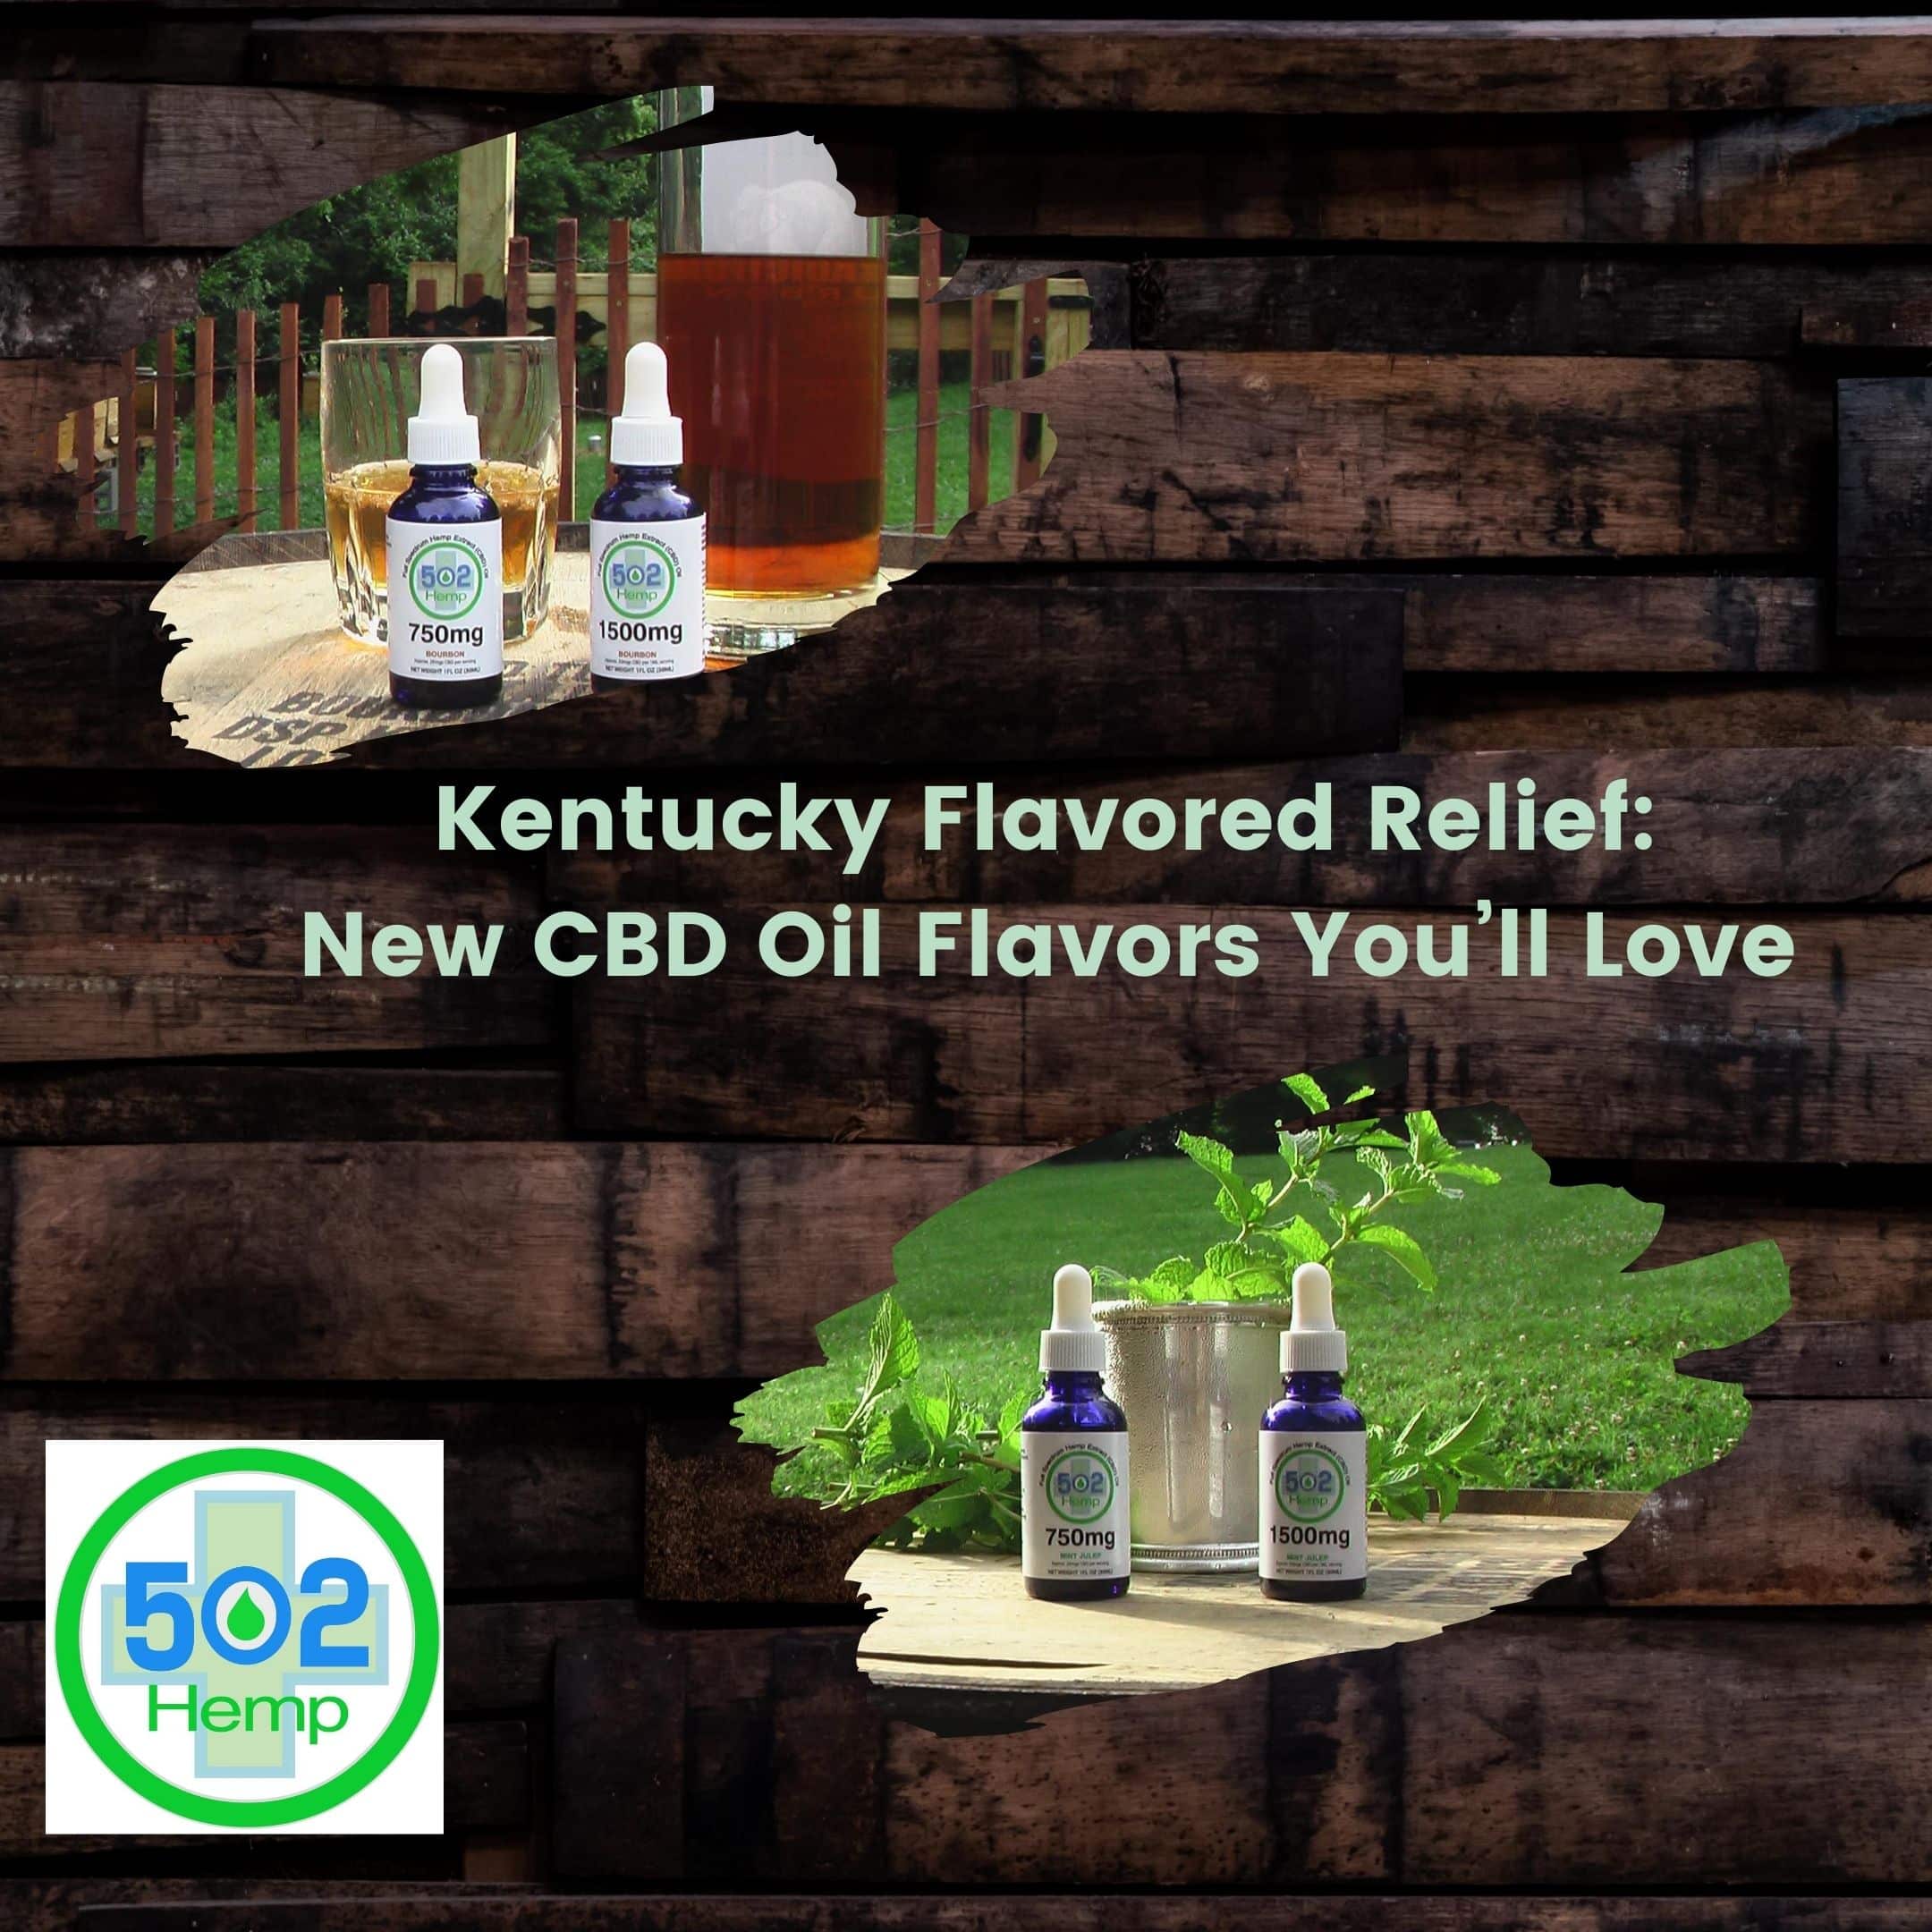 Kentucky Flavored Relief: New CBD Oil Flavors You’ll Love